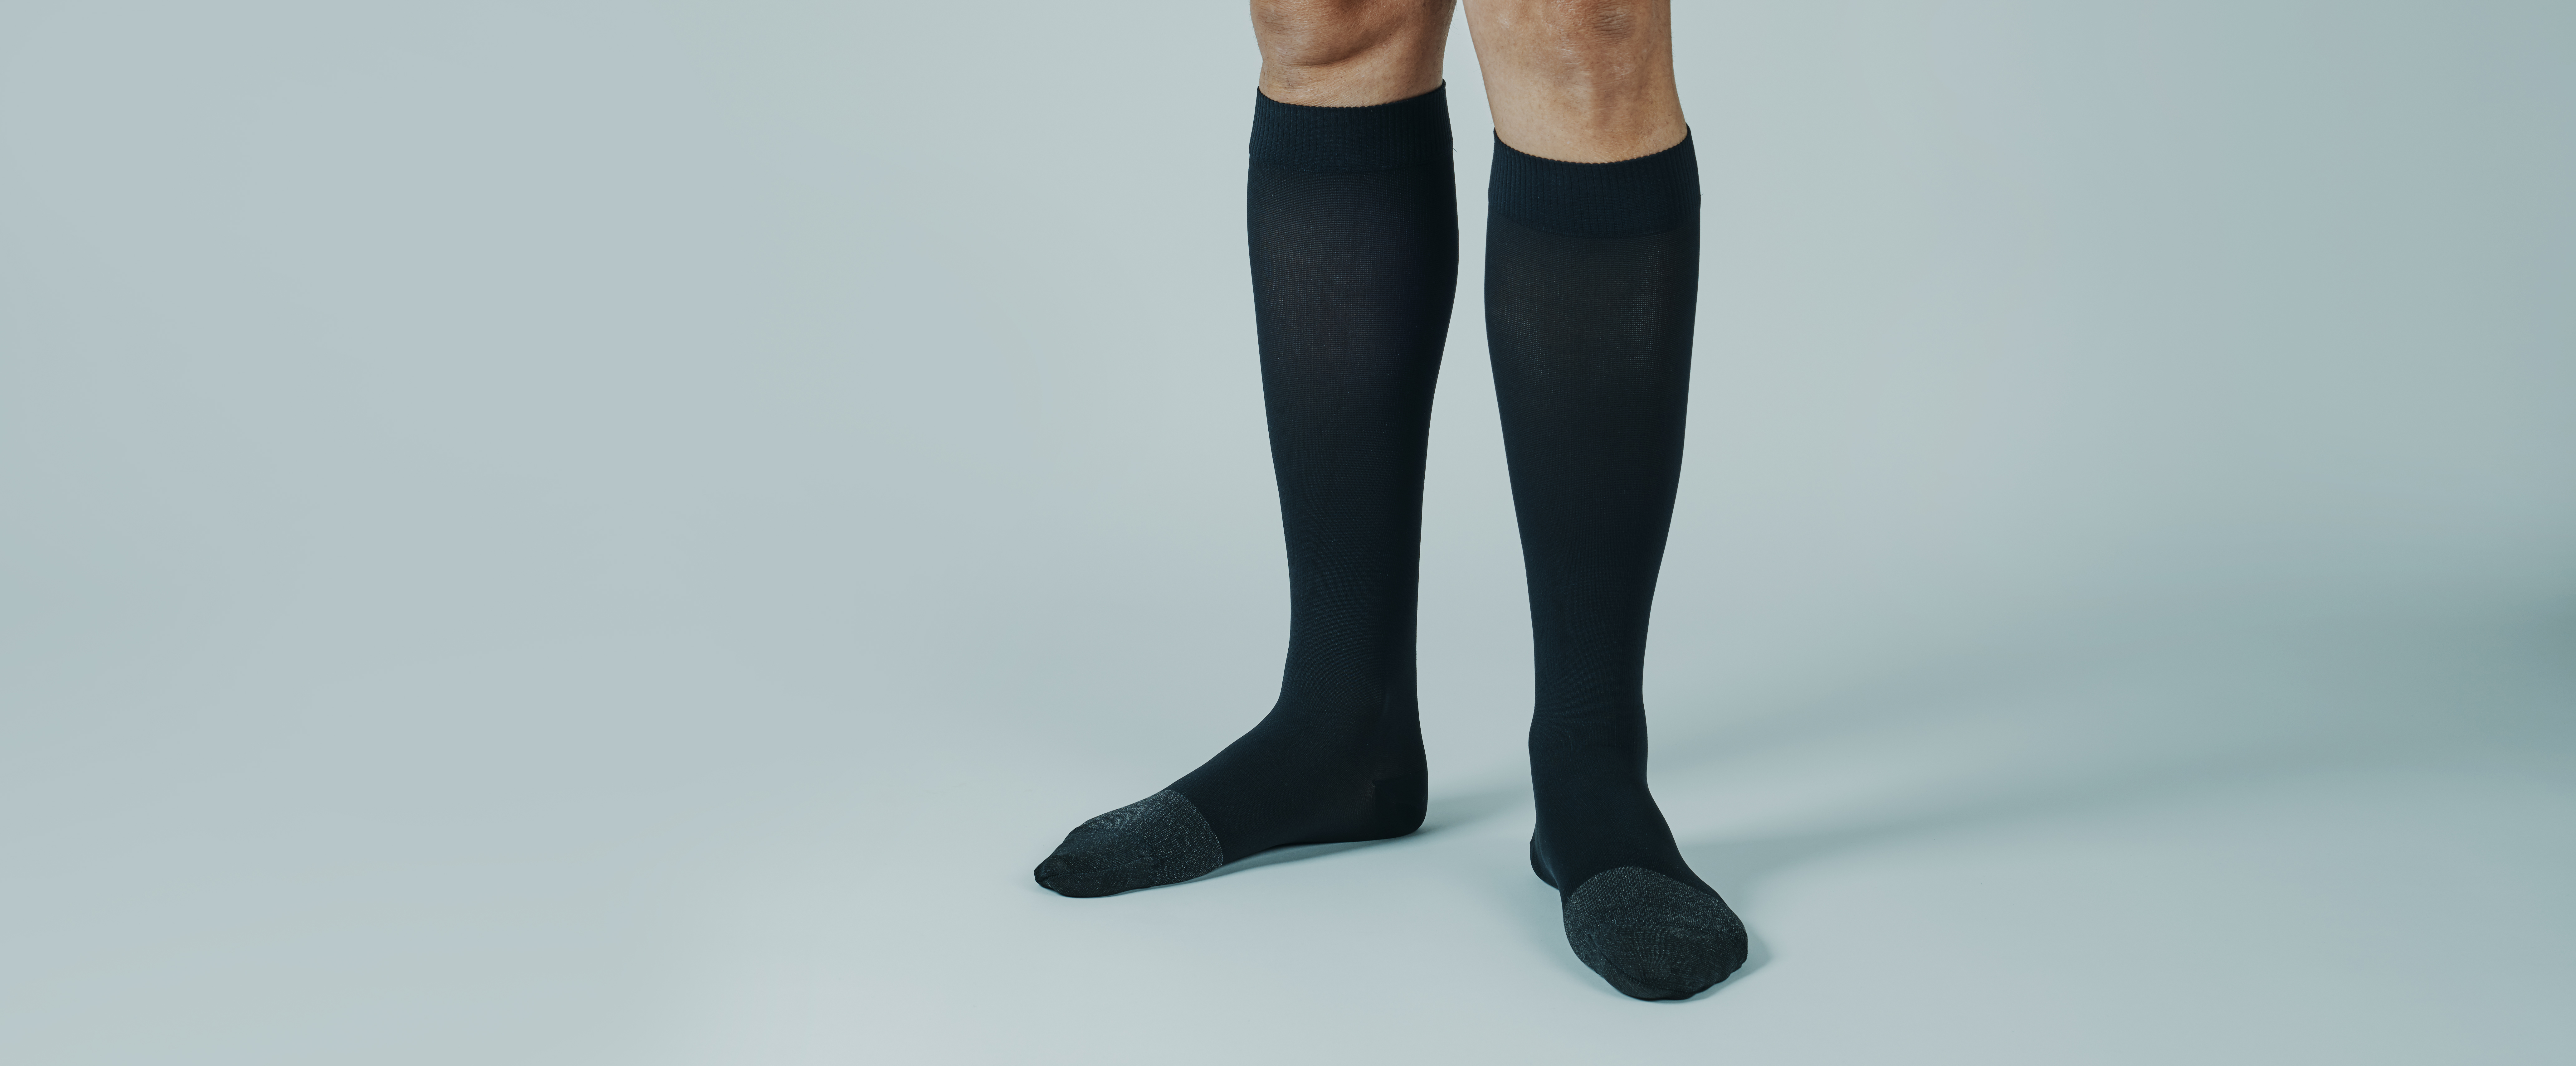 A person with black compression socks and flat shoes